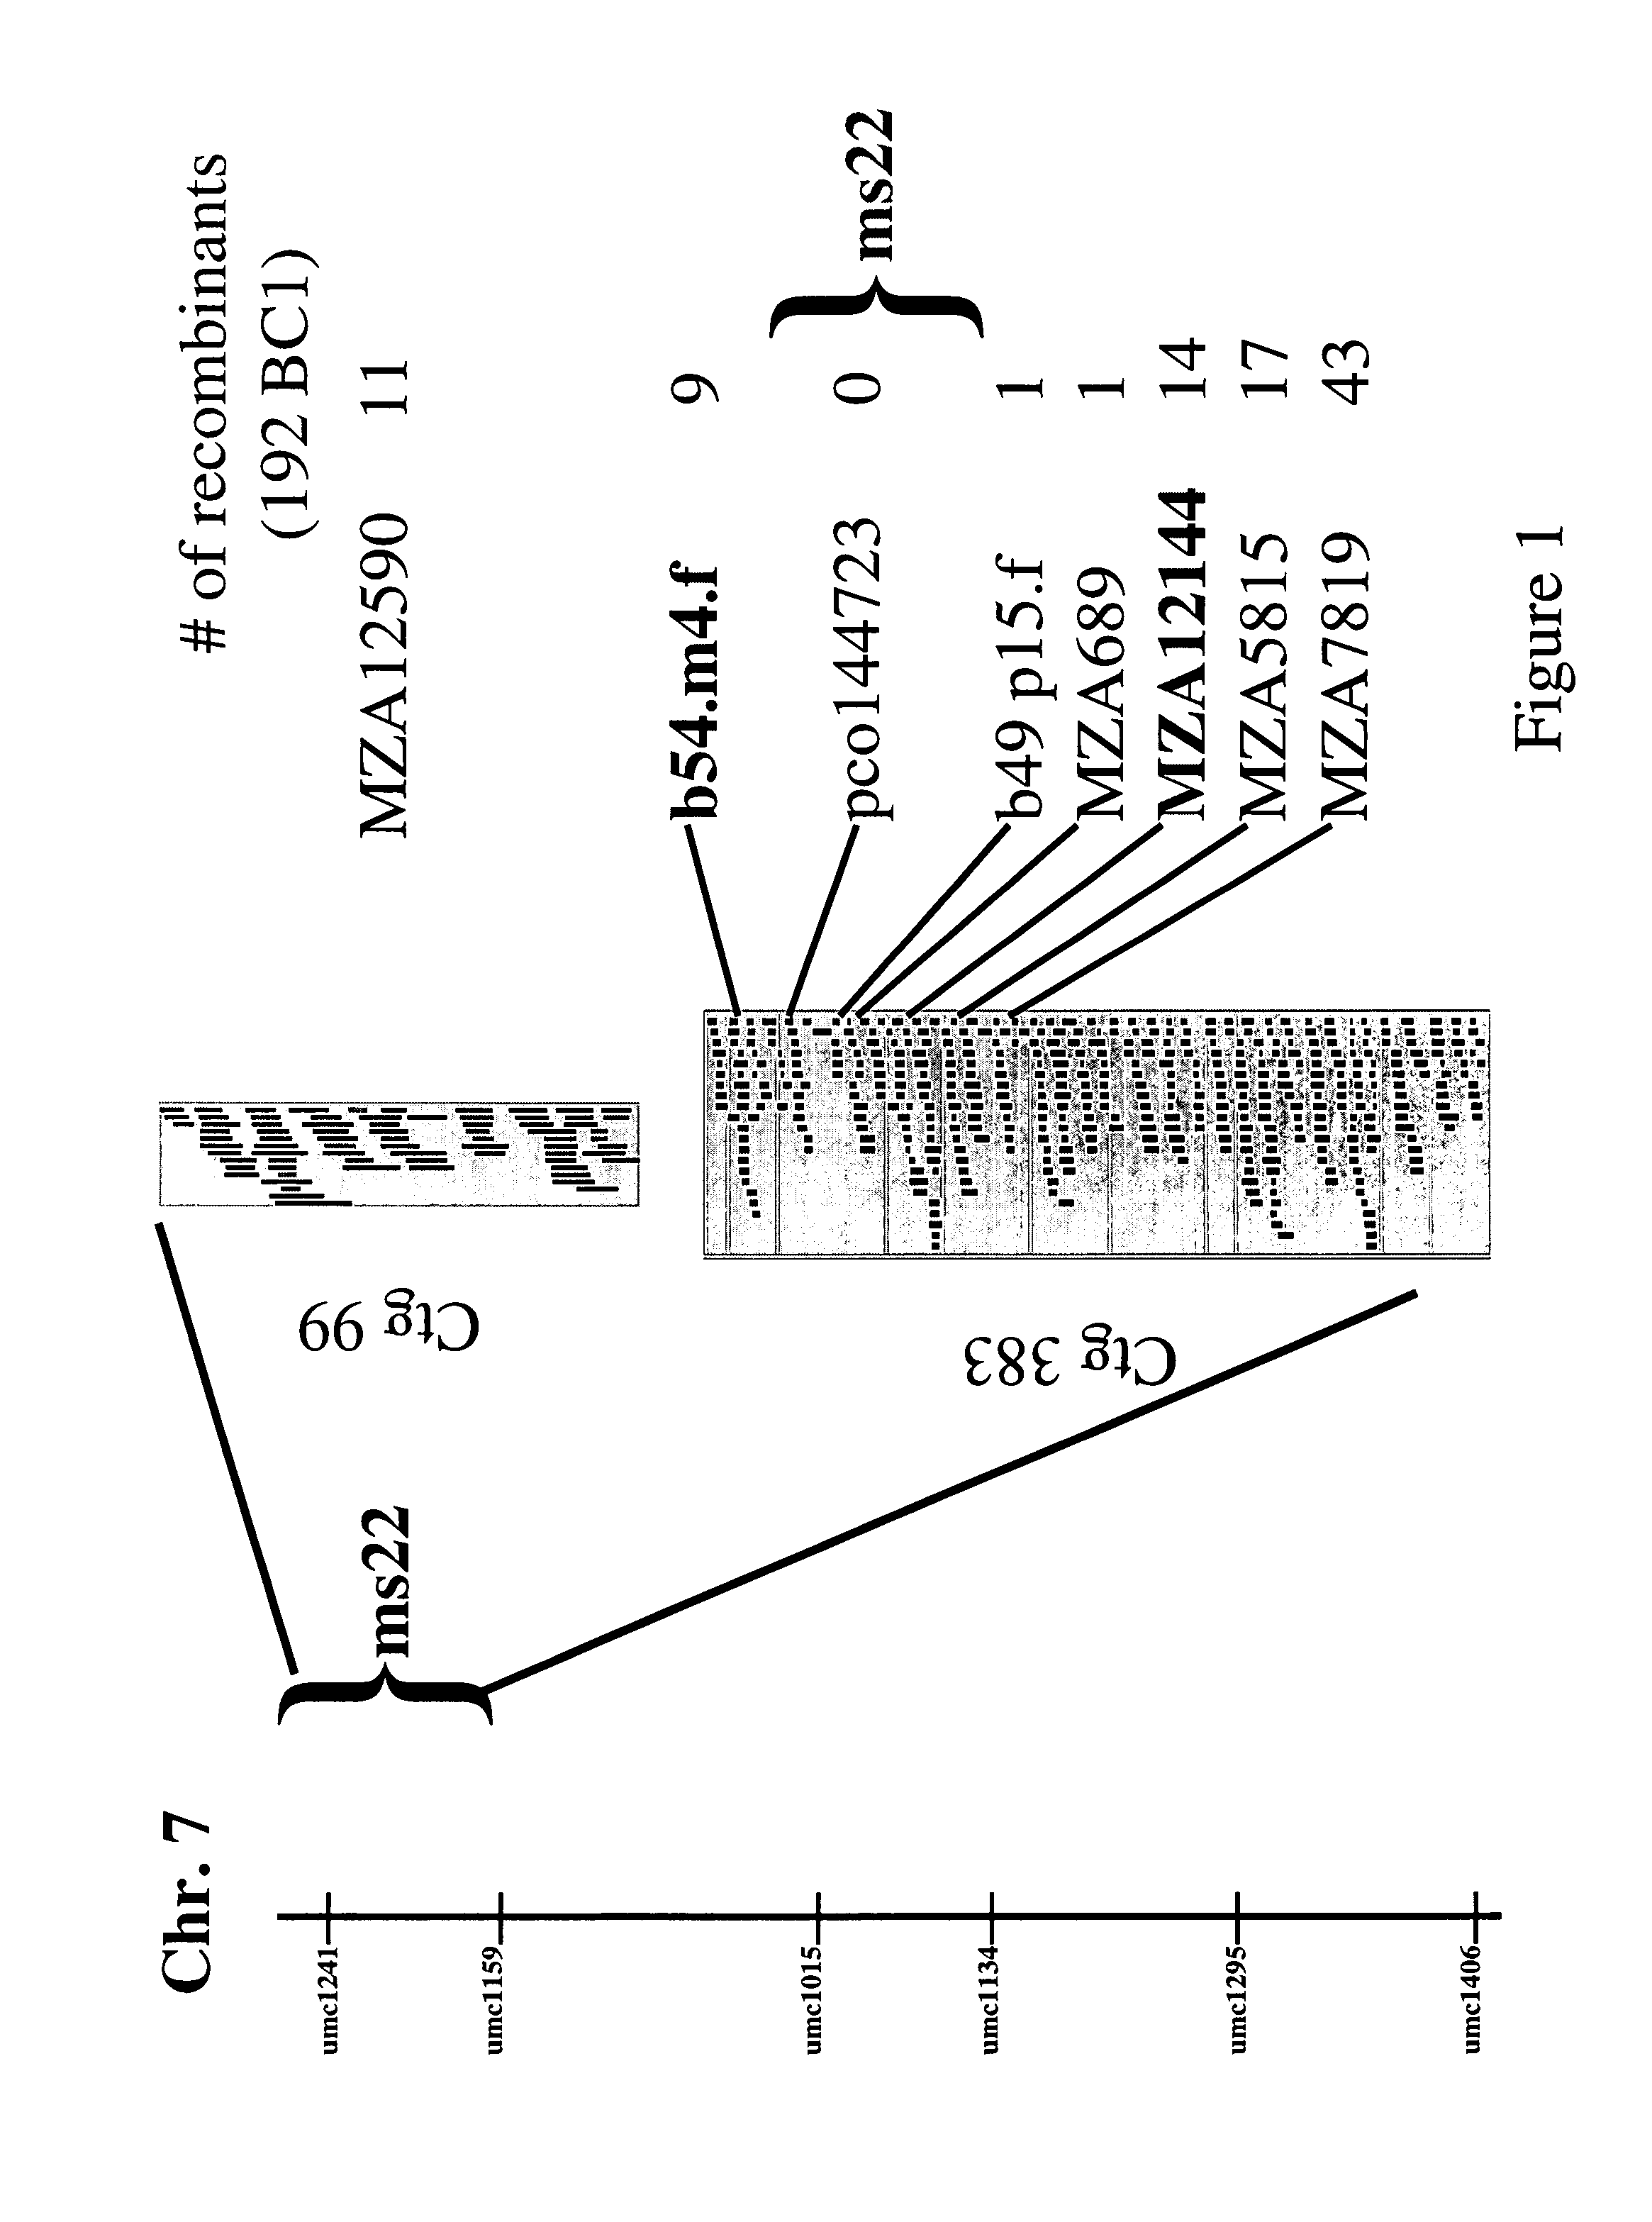 Msca1 nucleotide sequences impacting plant male fertility and method of using same